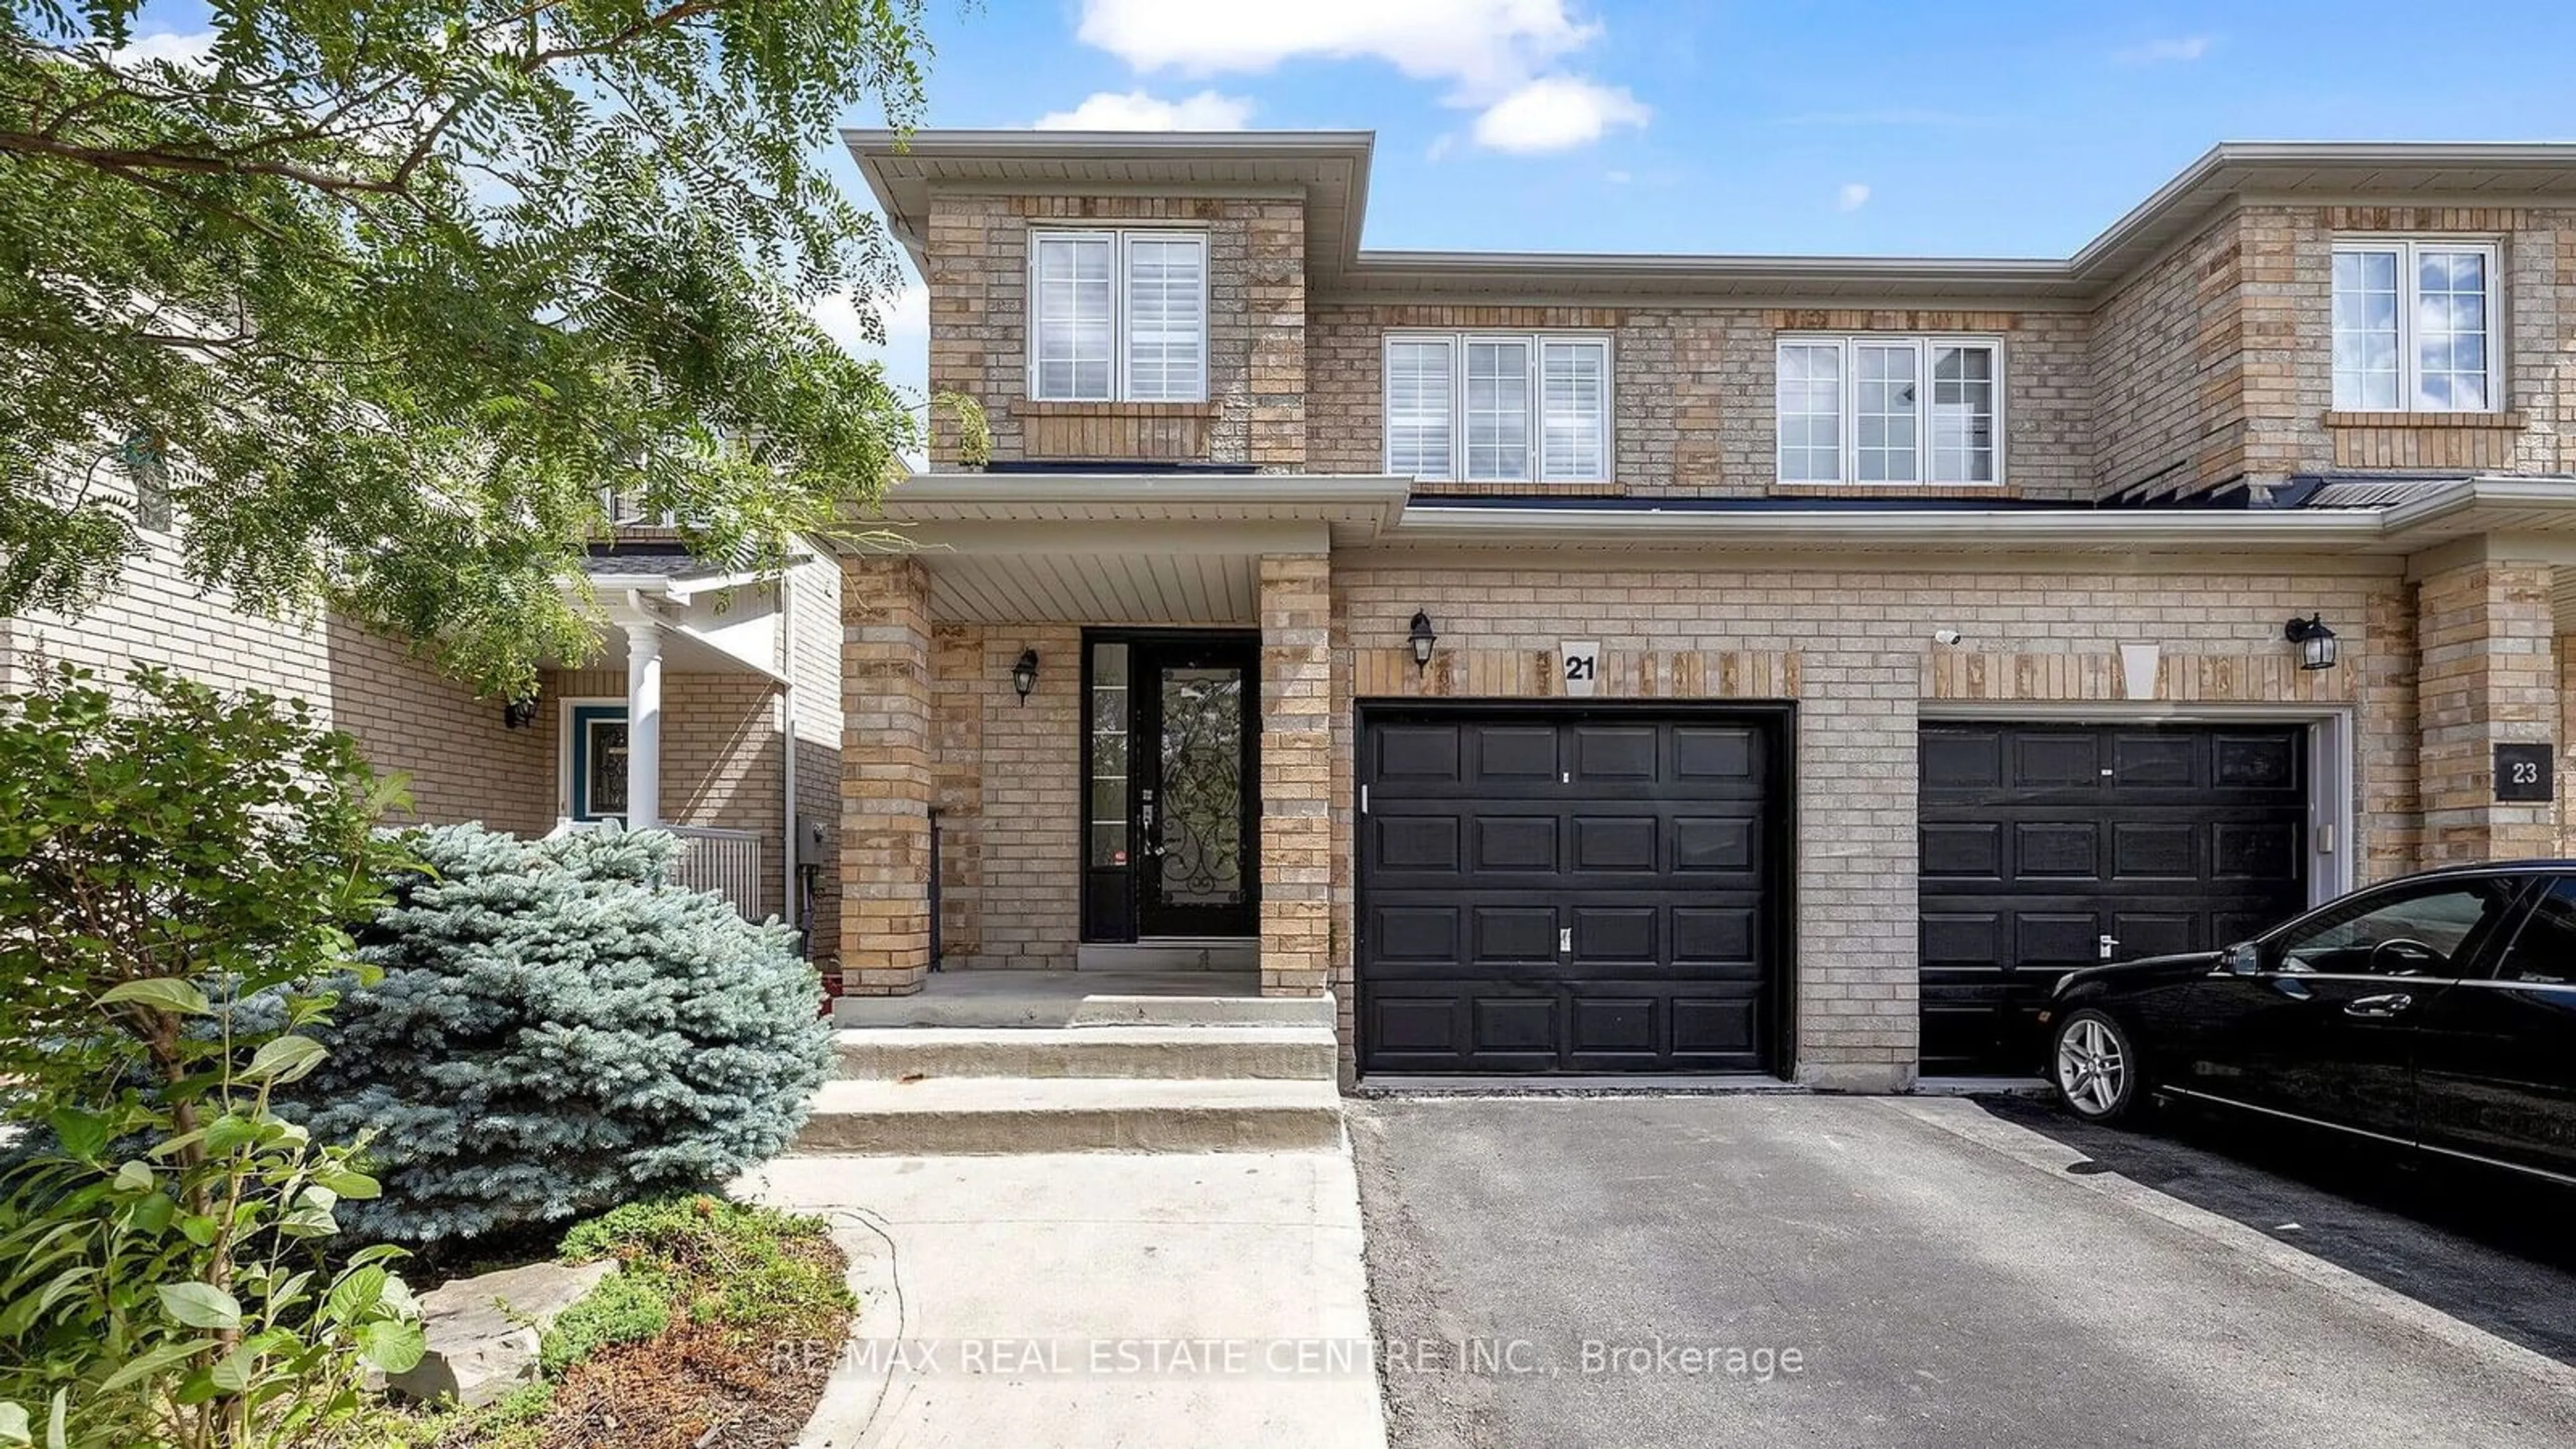 Home with brick exterior material for 21 Roadmaster Lane, Brampton Ontario L7A 3A9